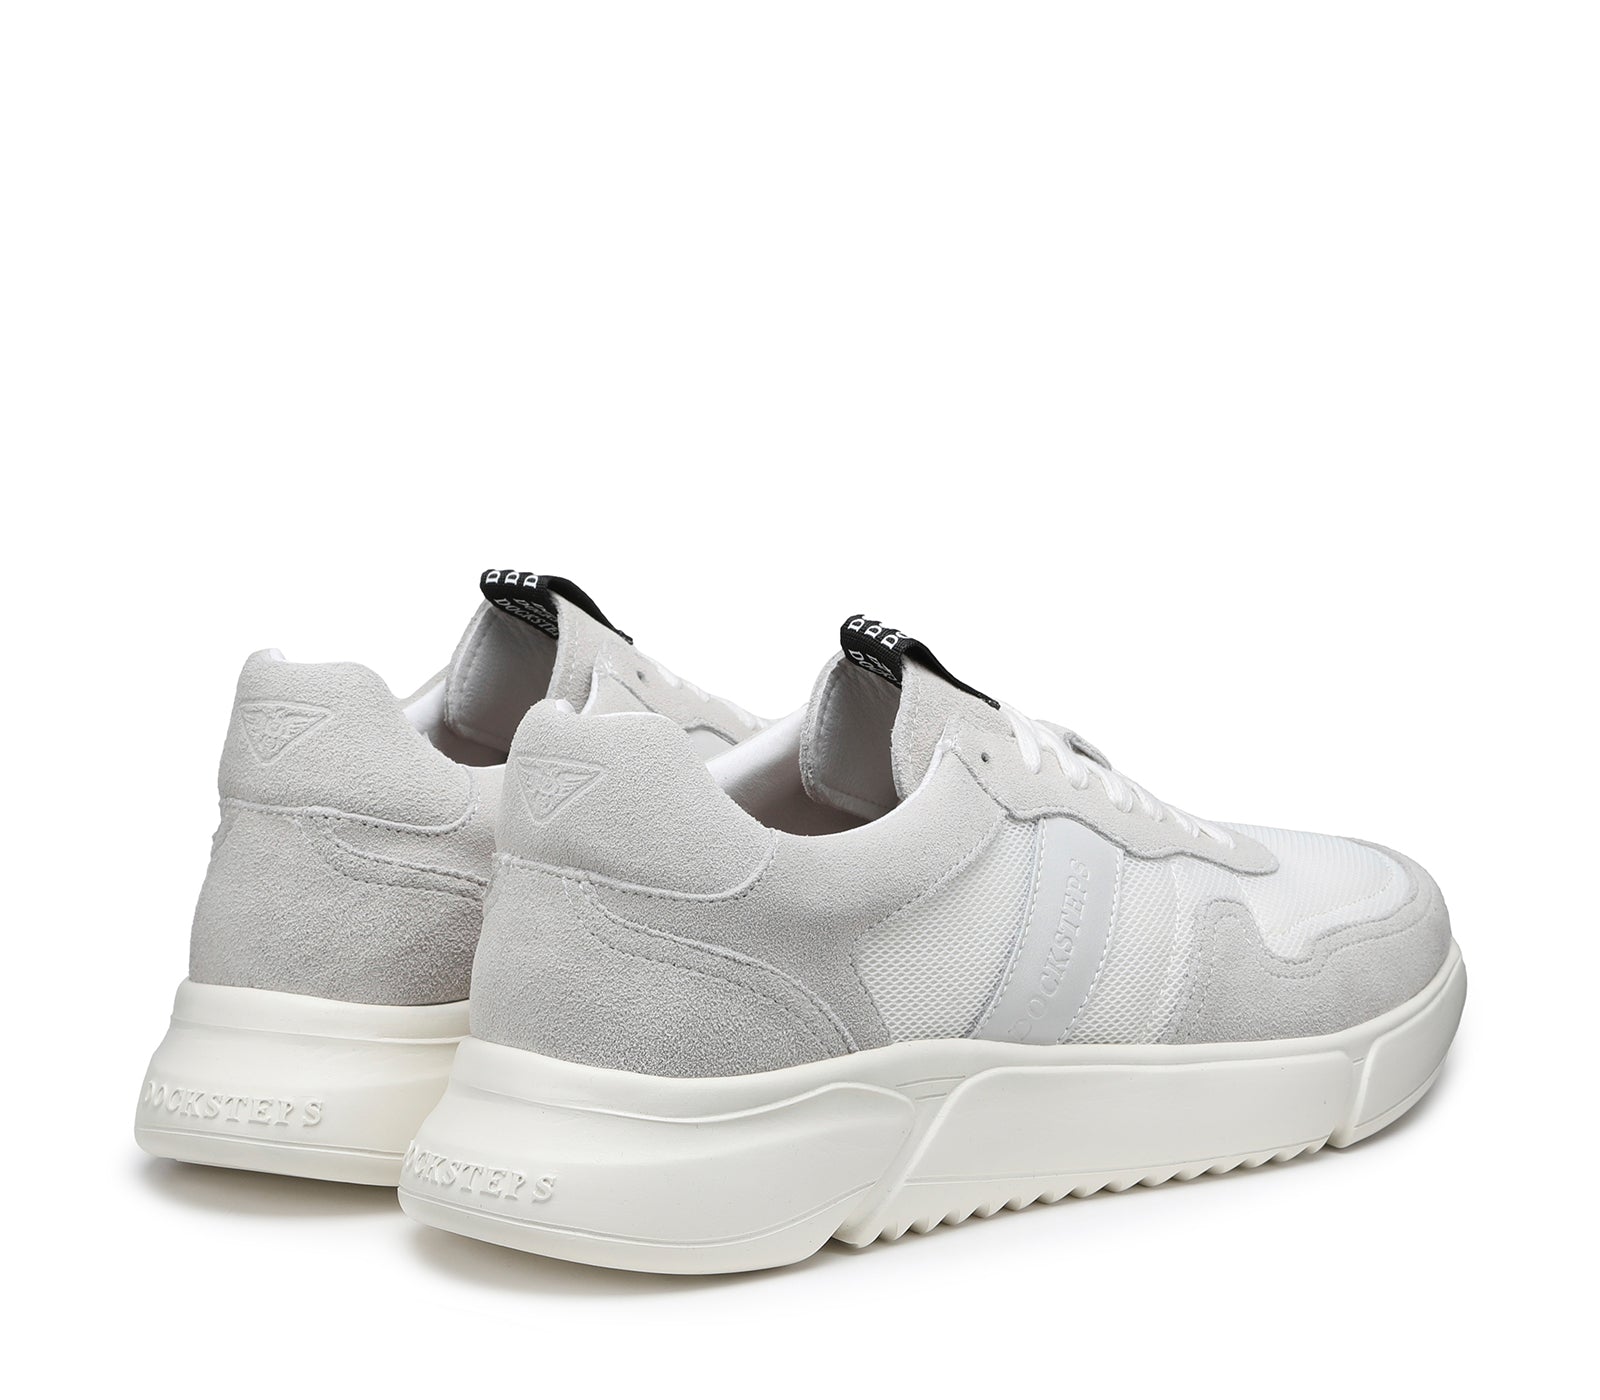 Men's Suede Sneakers White